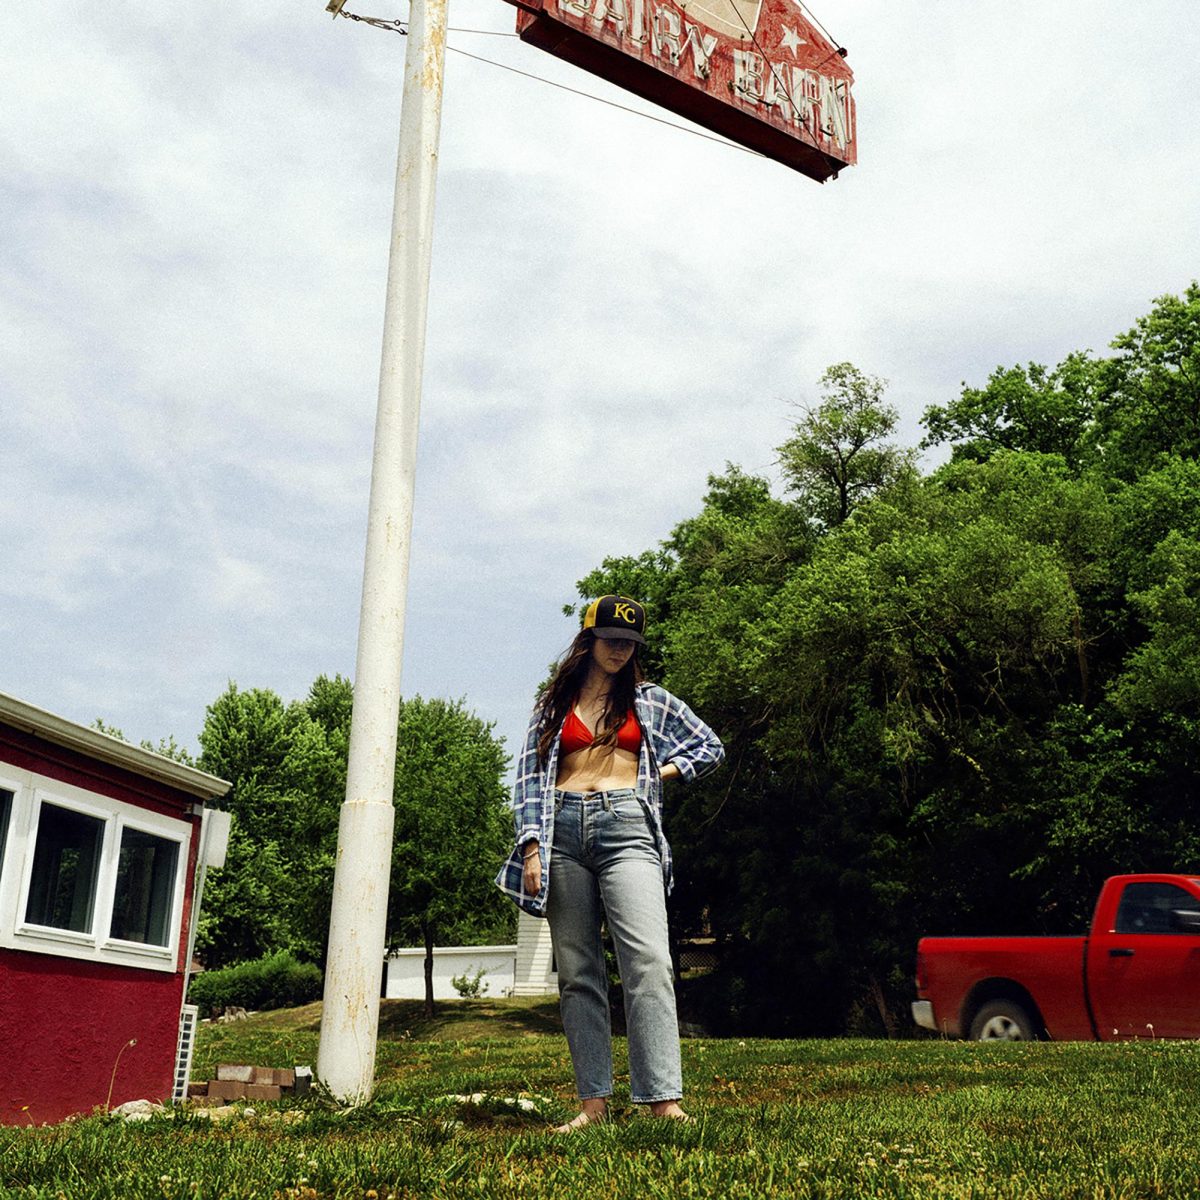 A woman stands beside an old neon sign with some trees and a red pickup in the background. This image is the cover to Waxahatchees newest album Tigers Blood, one of three major indie-folk albums to release this week. (ANTI Records via AP)